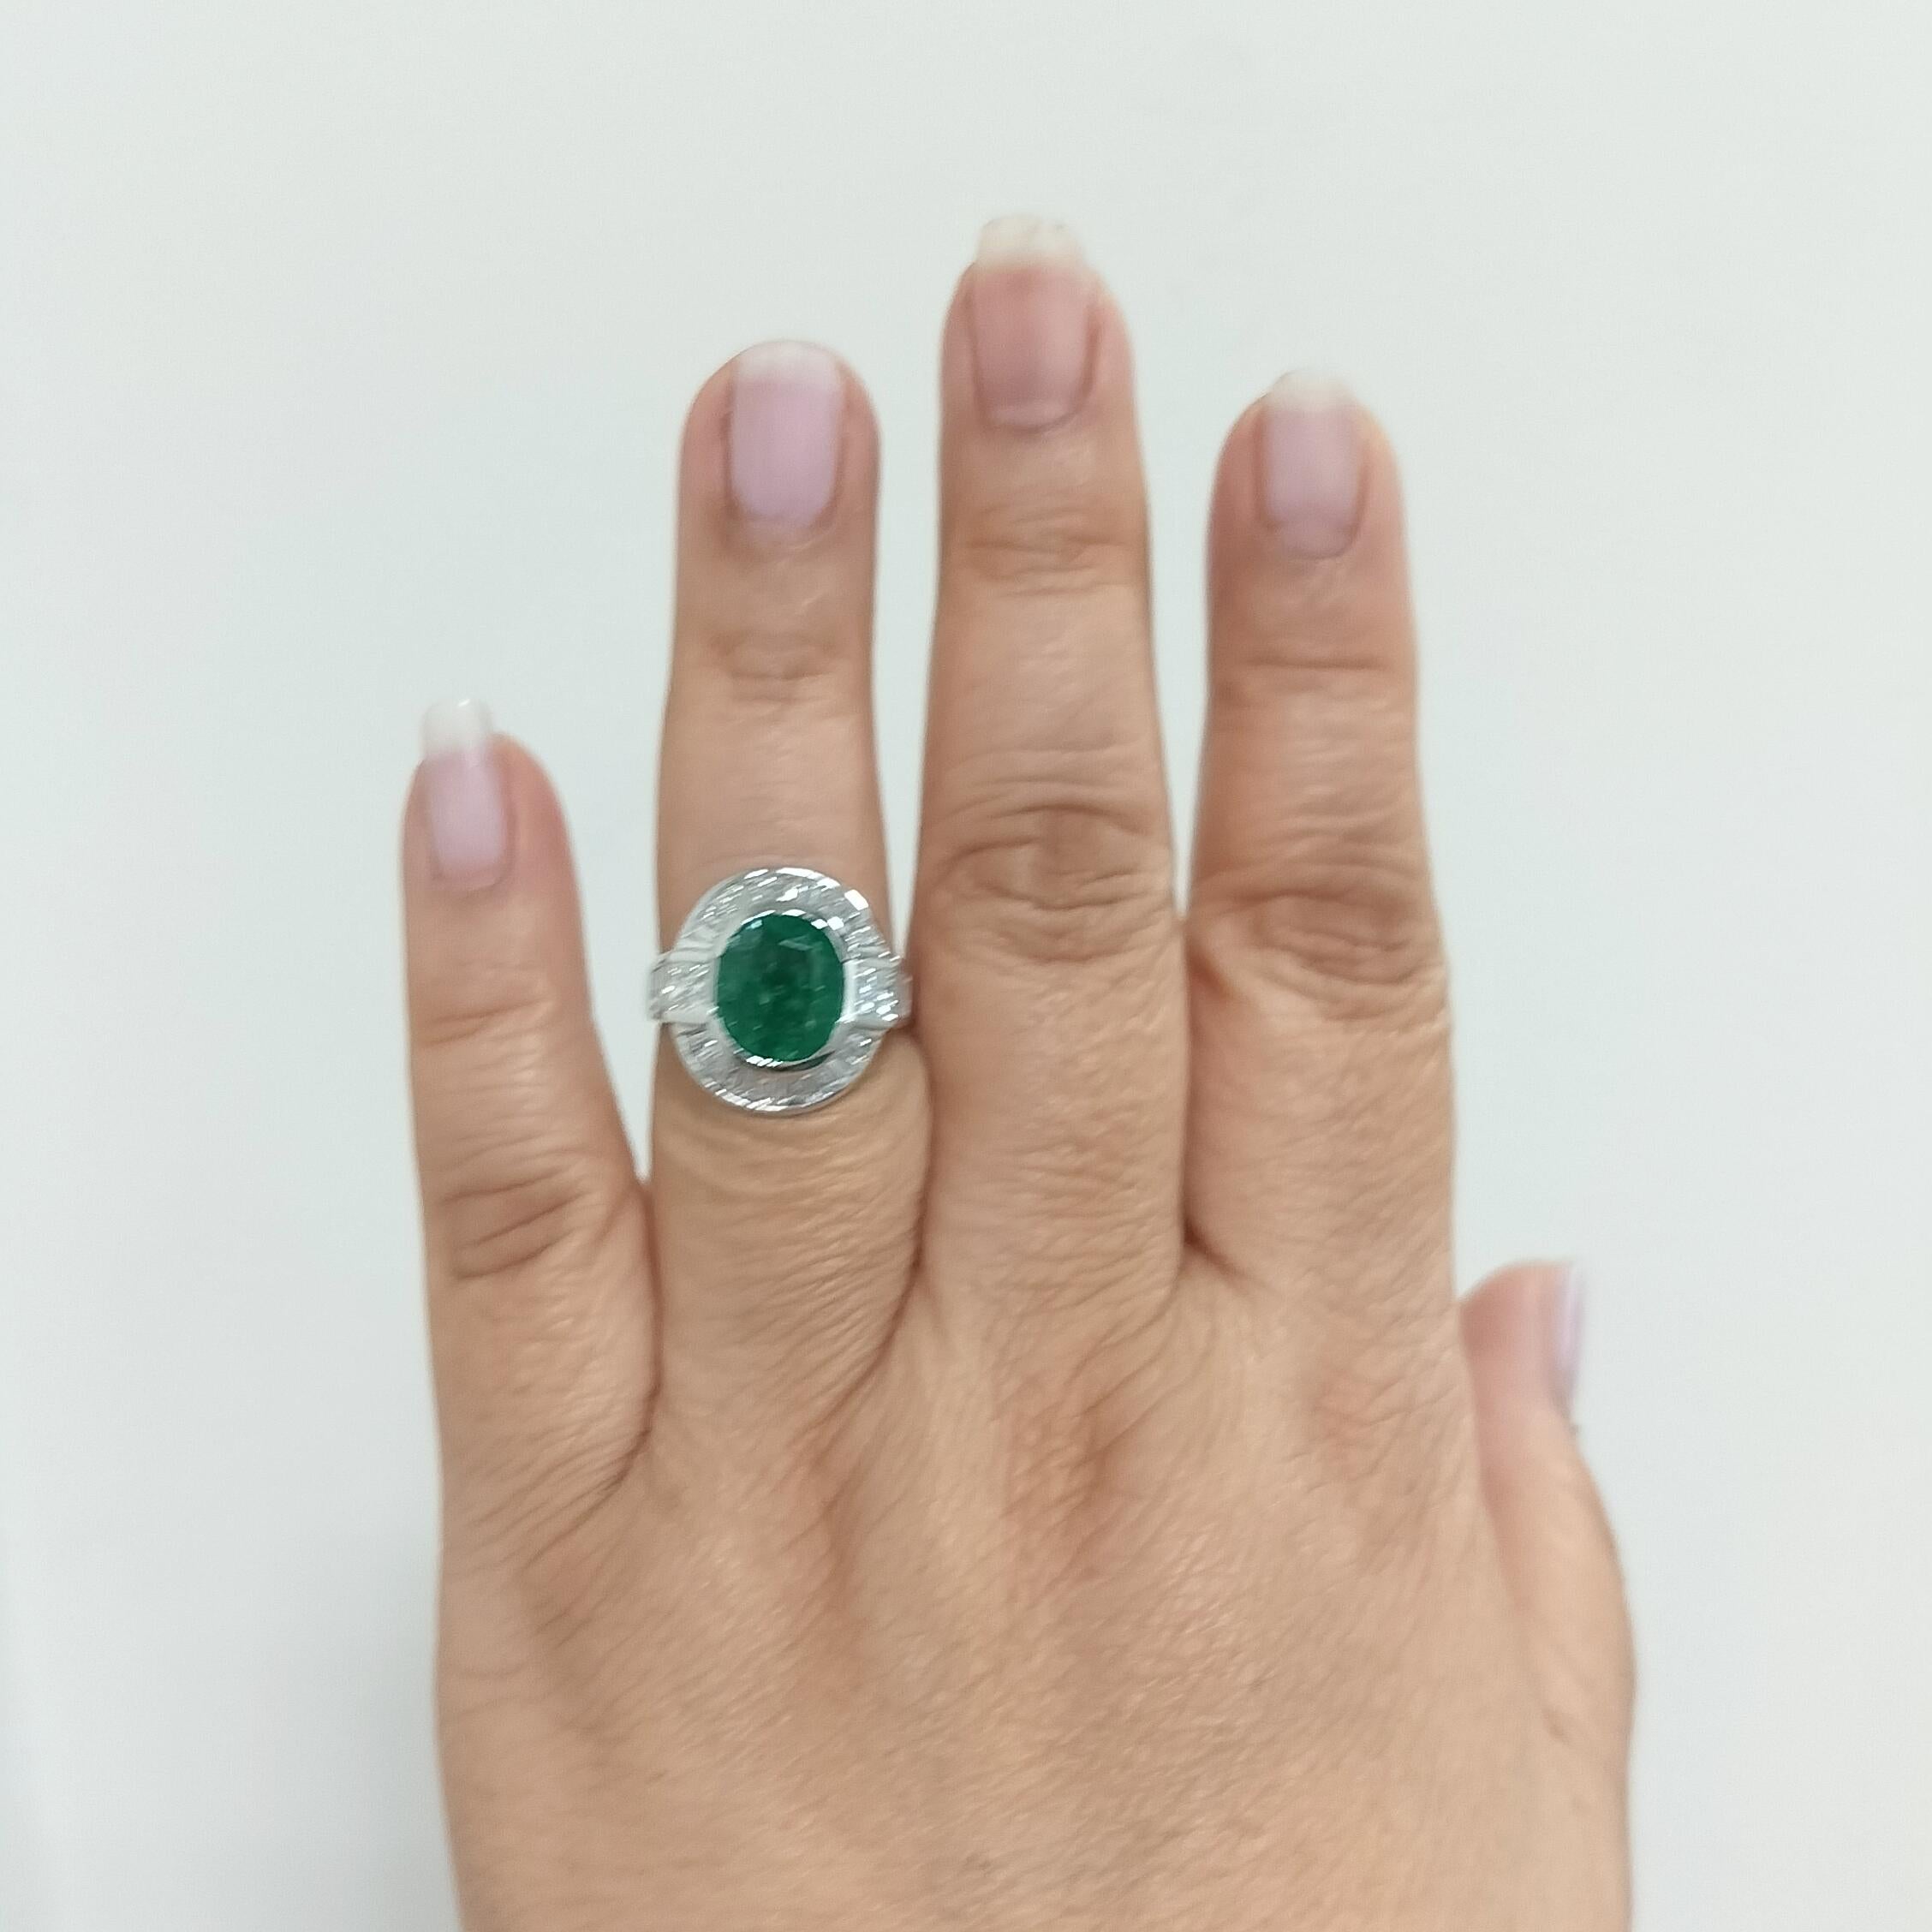 Beautiful bright green 4.07 ct. emerald cushion with good quality, white, and bright diamond baguettes and square cuts.  Handmade in 18k white gold.  Ring size 7.